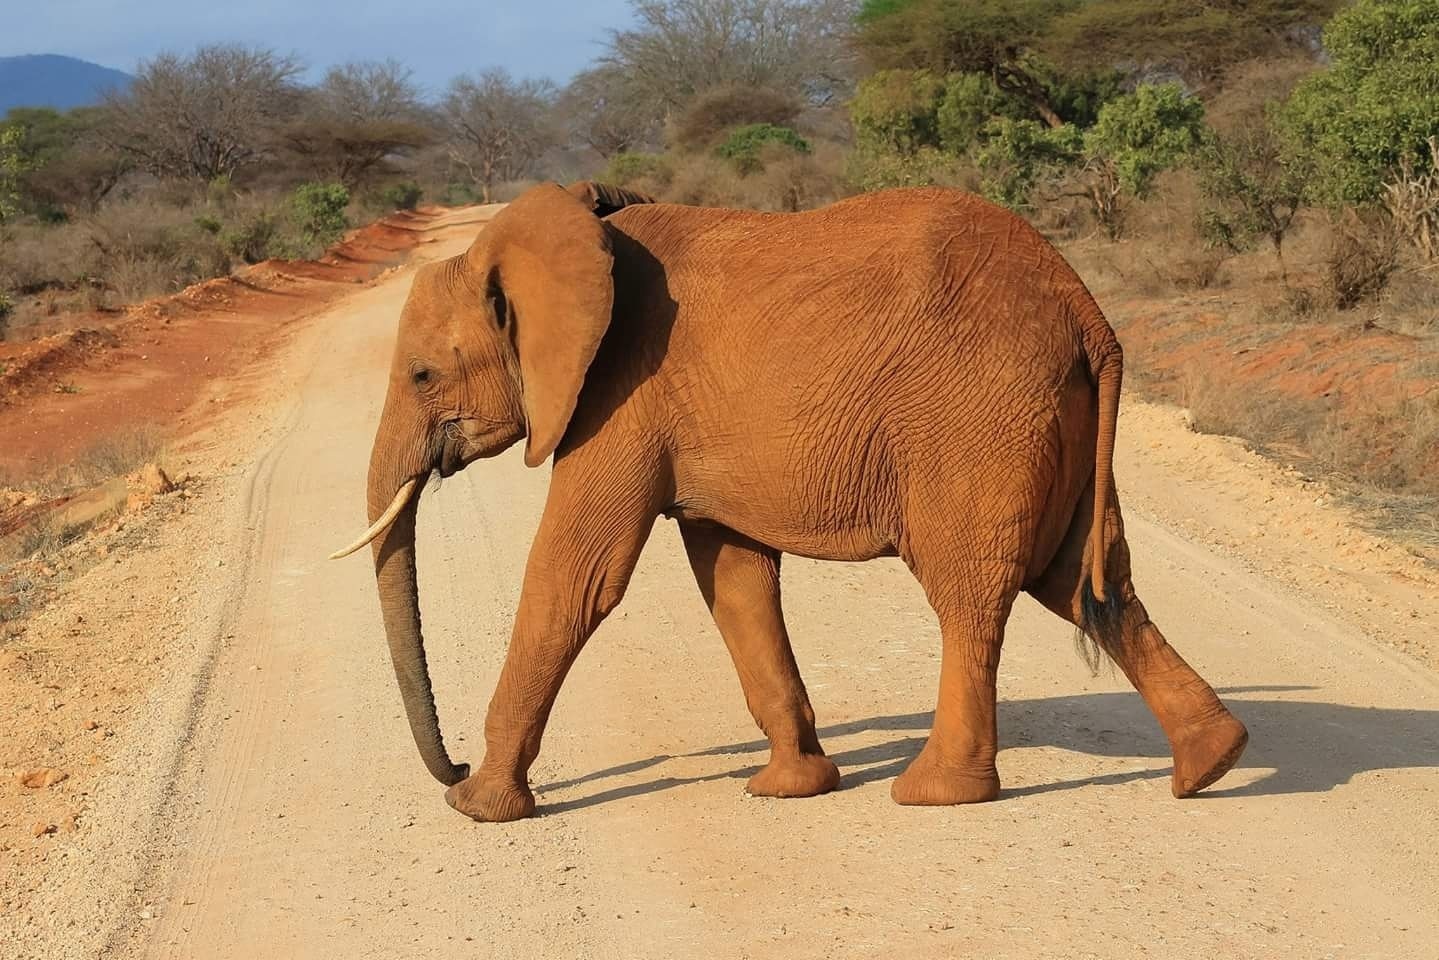 Magical safari in this wonderful place, close call with this elephant charging at jeep